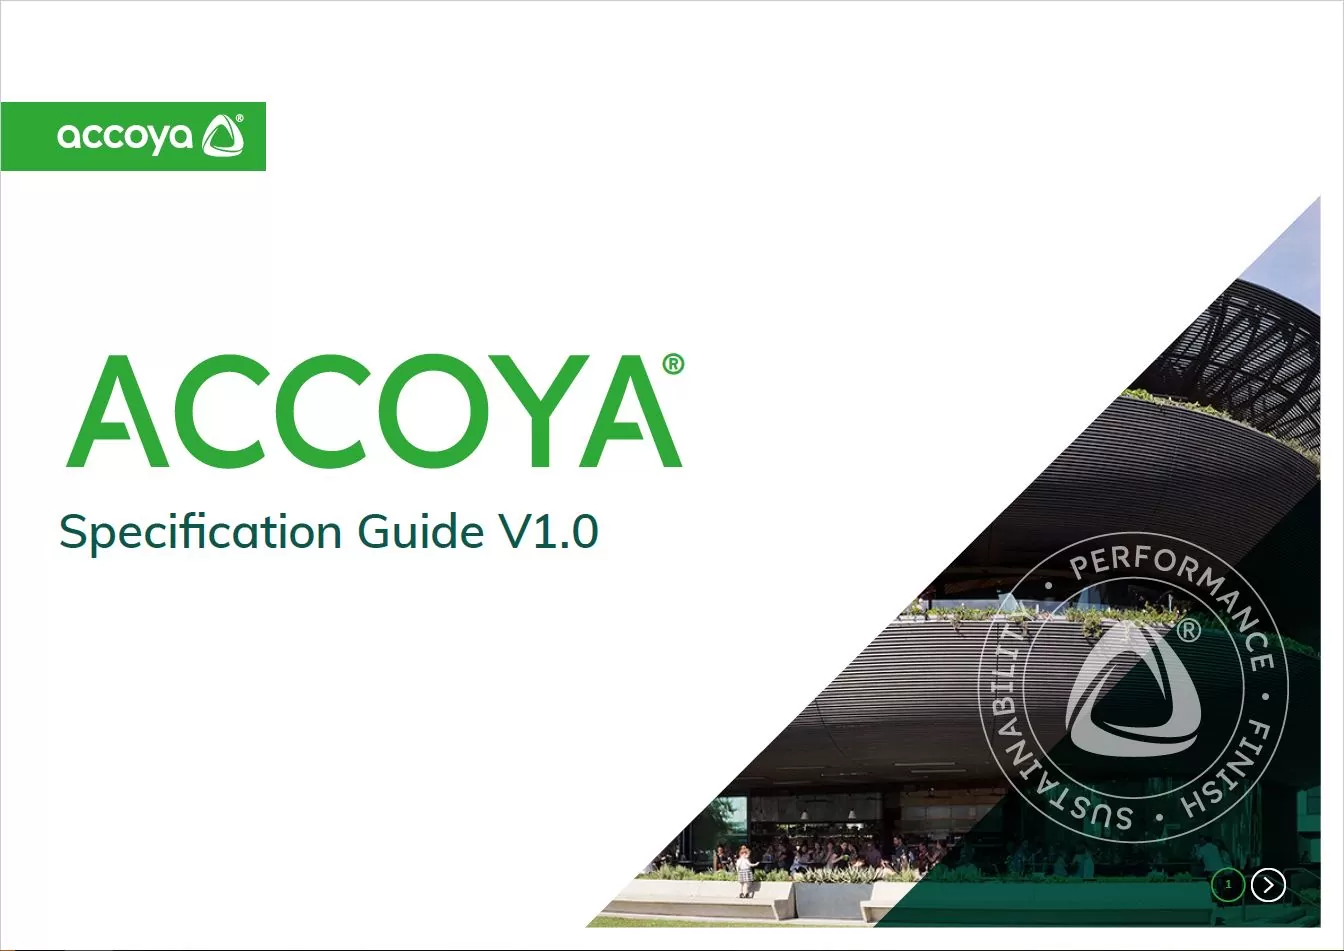 Accoya Specification Guide